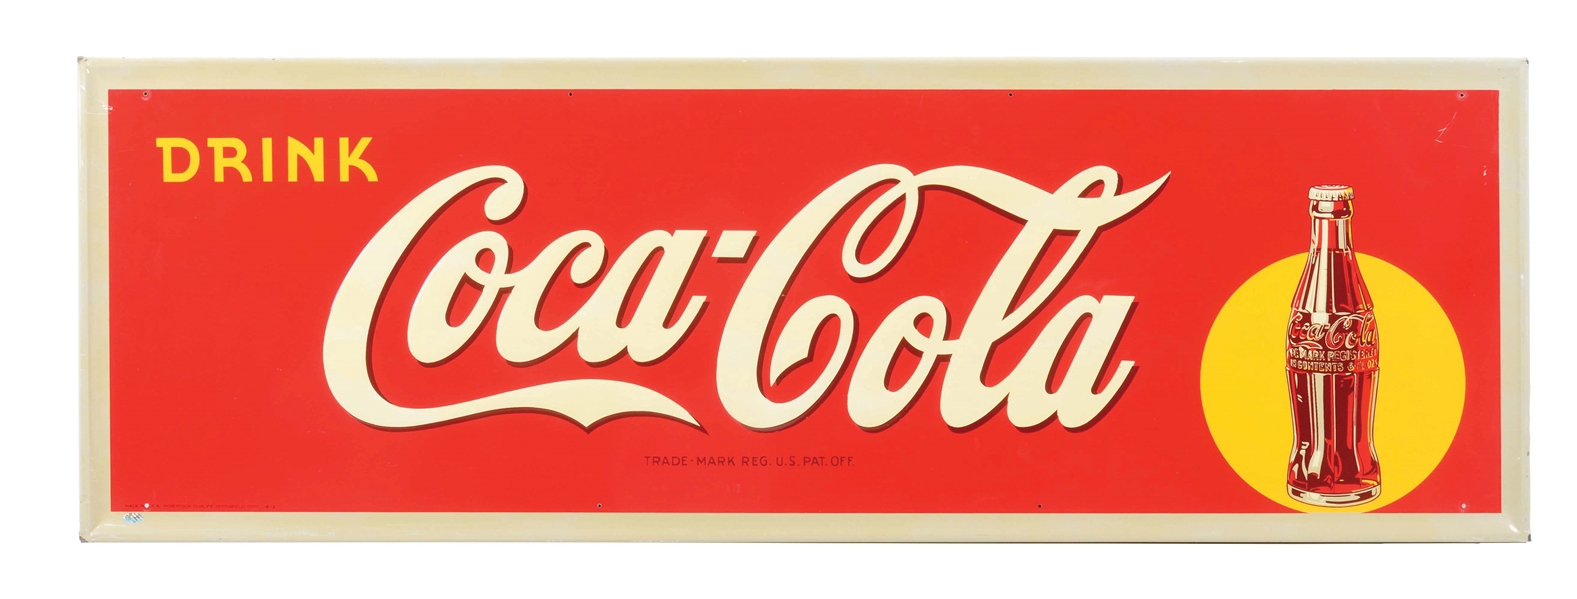 OUTSTANDING DRINK COCA COLA EMBOSSED TIN SIGN W/ BOTTLE GRAPHIC. 